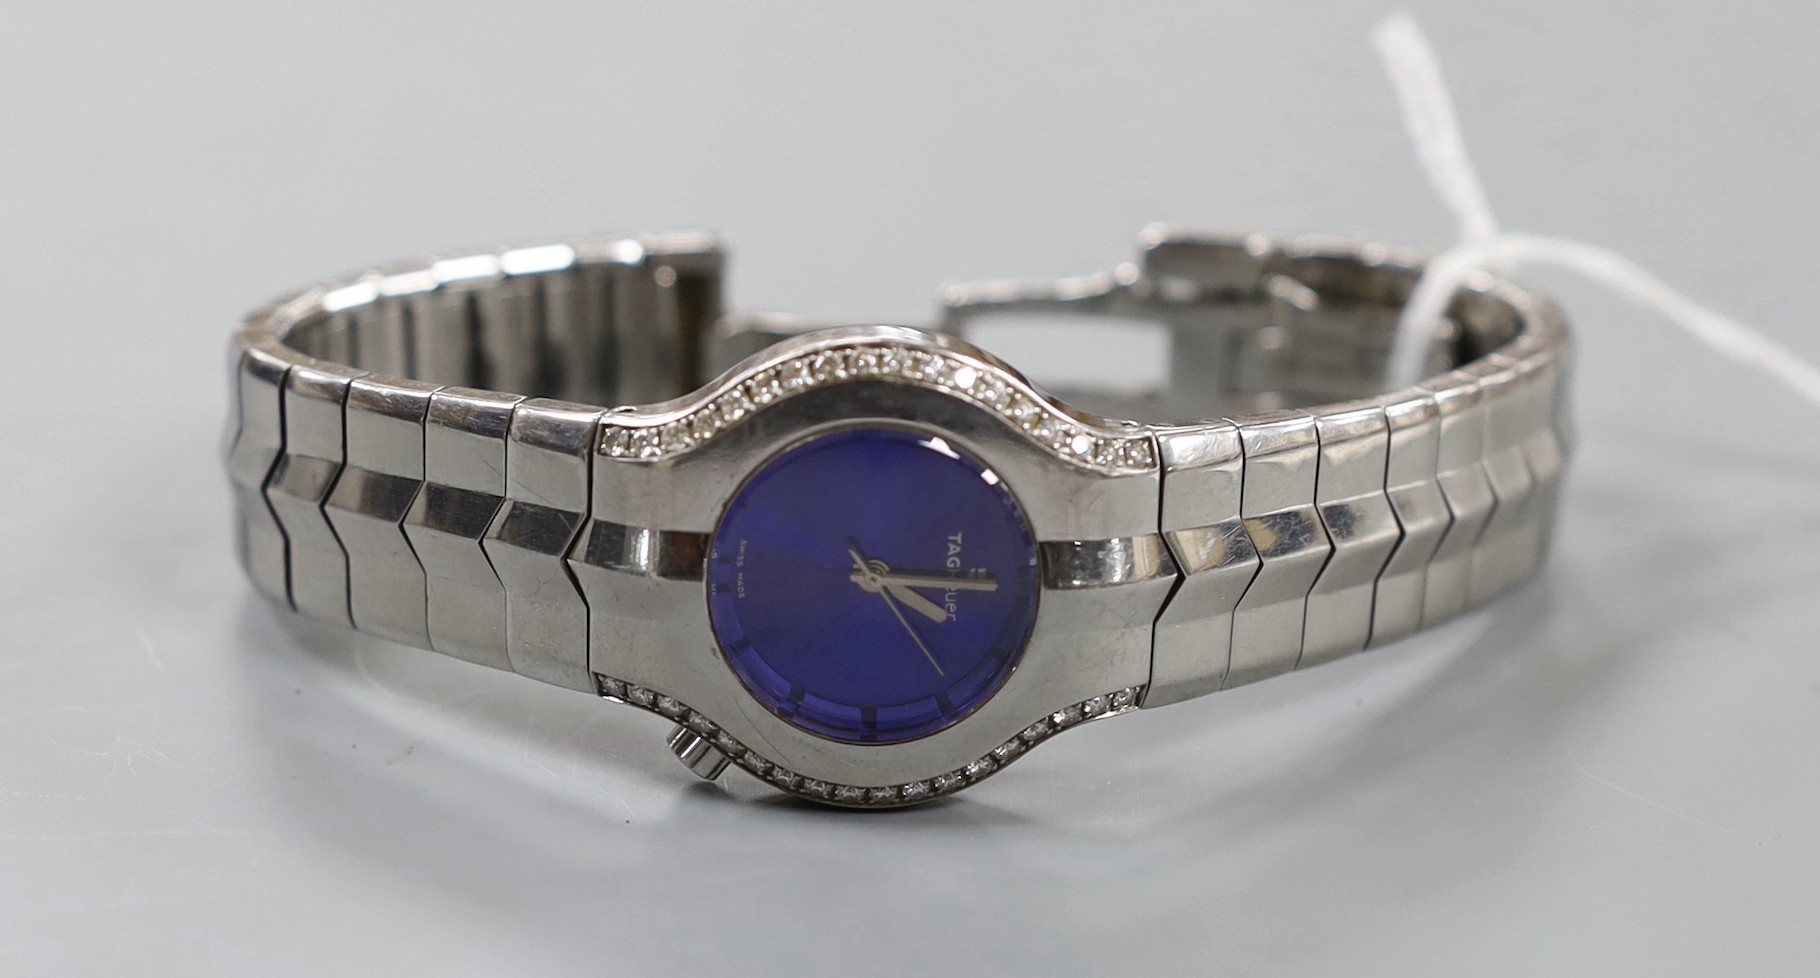 A lady's stylish modern steel Tag Heuer quartz wrist watch and bracelet, with blue dial and diamond chip set bezel, with boxes.